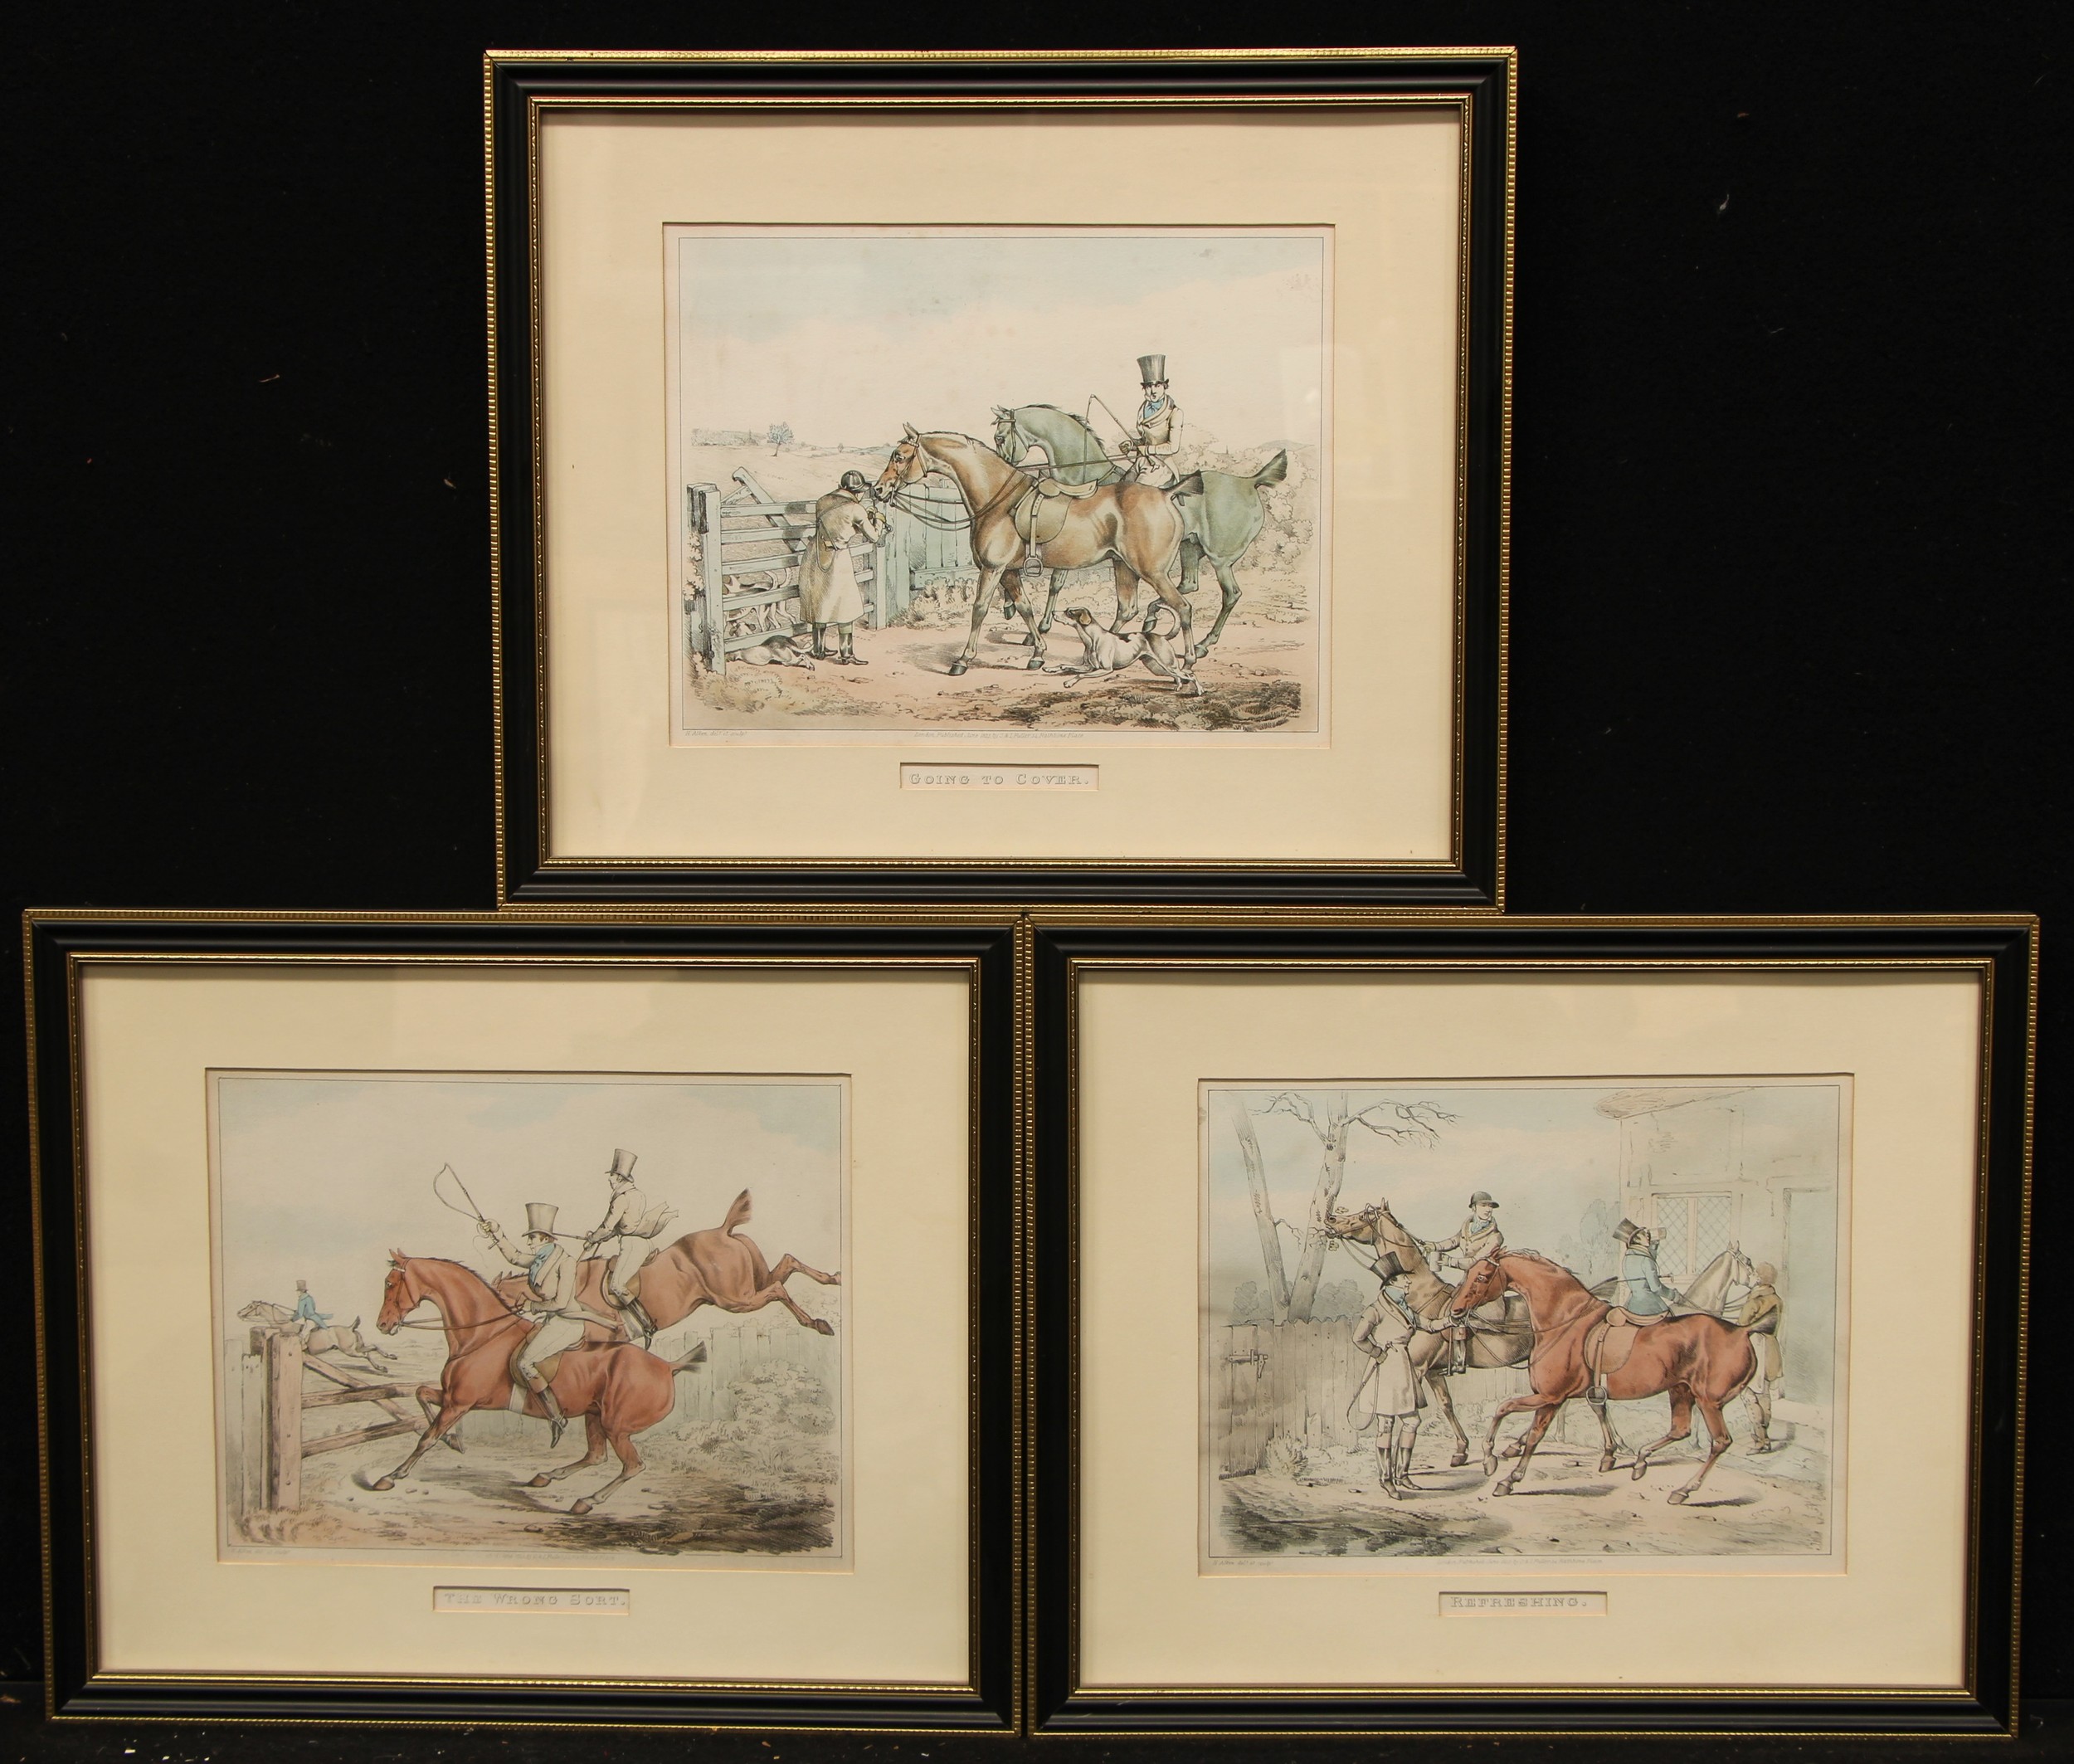 Henry Alken, after, a set of three, Refreshing, The Wrong Sort and Going To Cover, coloured